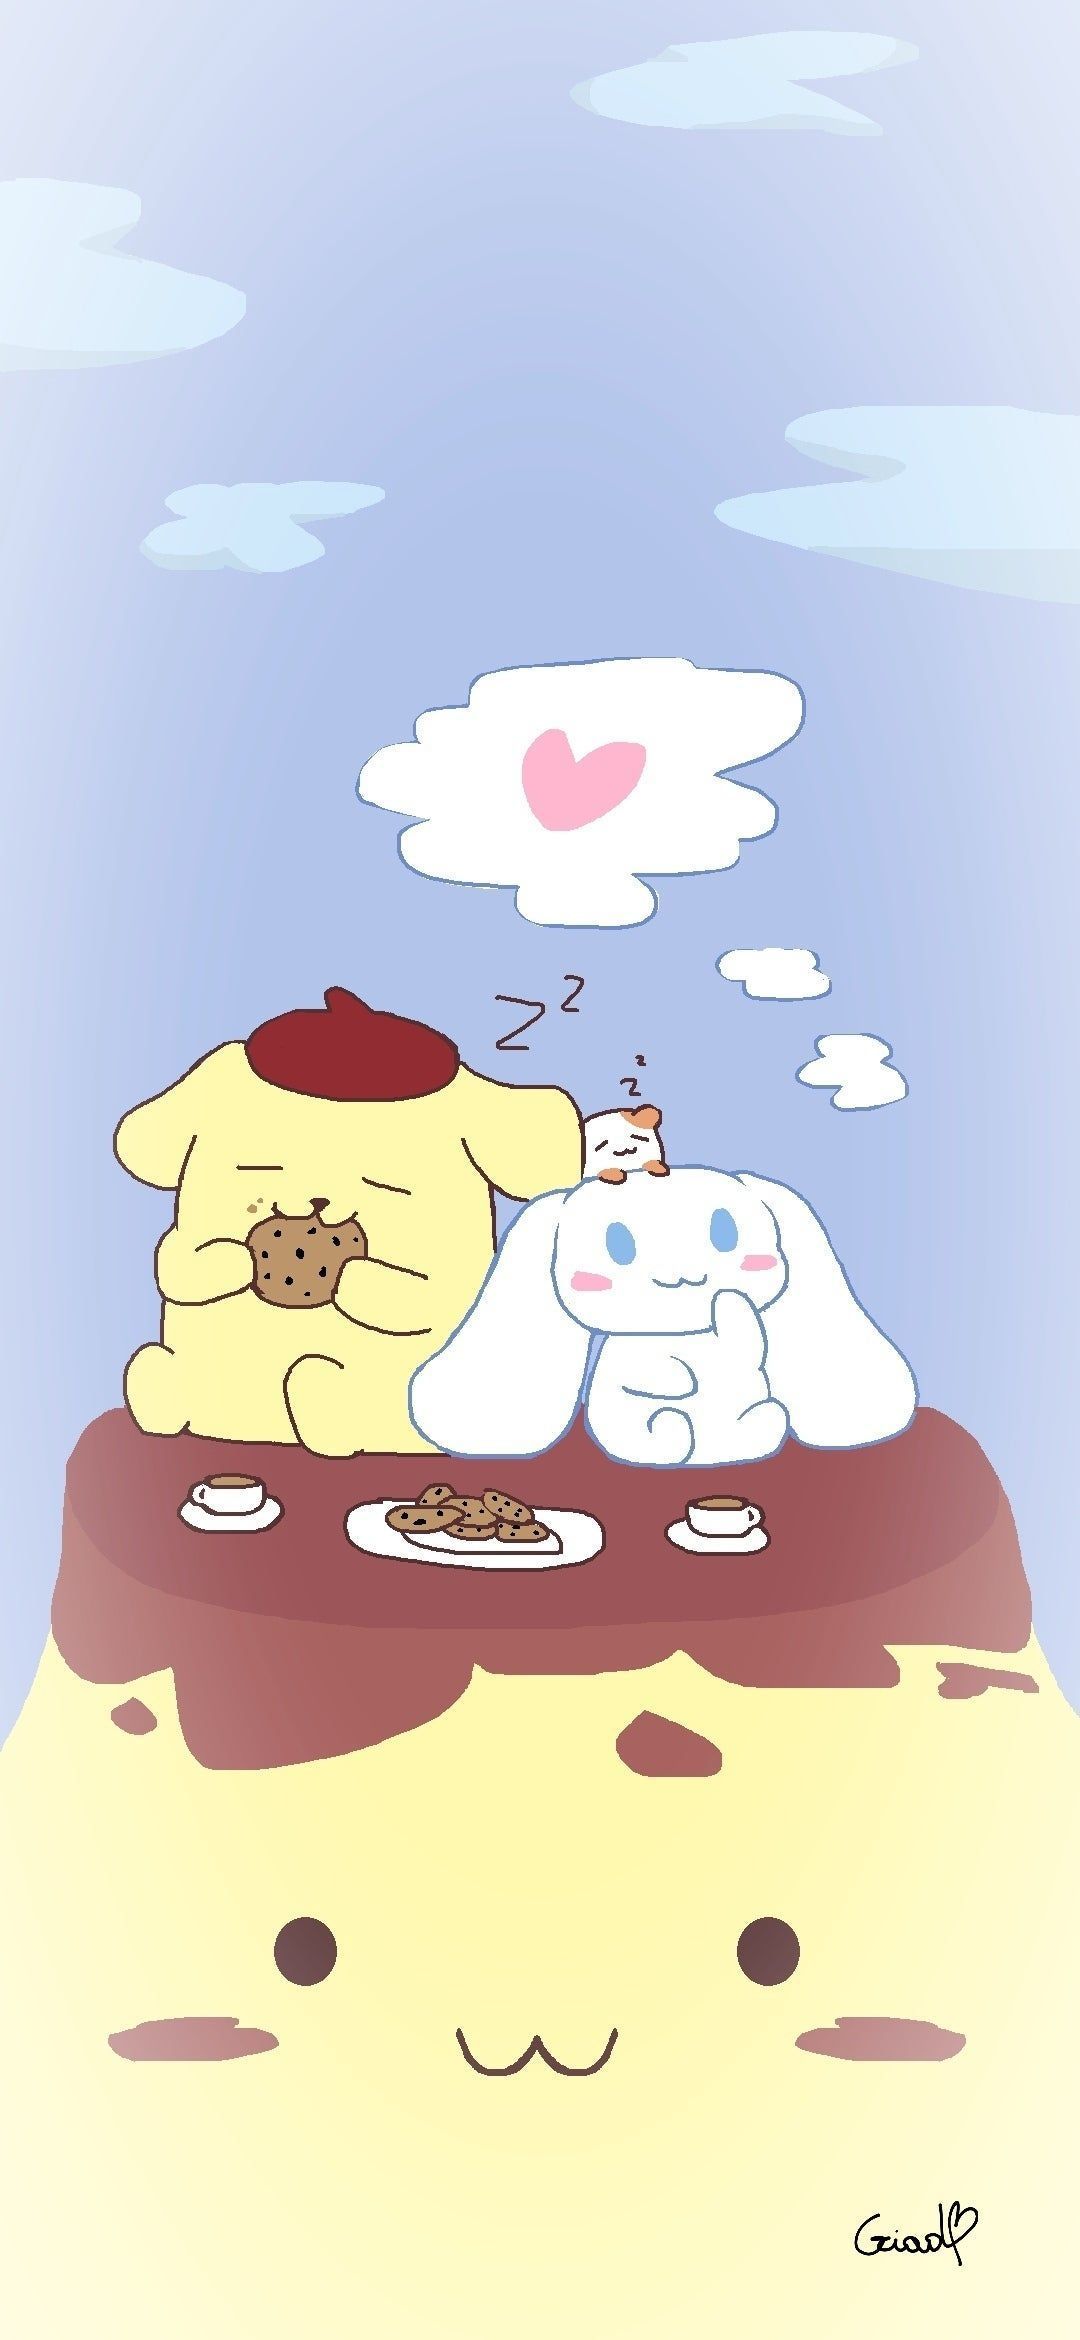 A dog and a rabbit are sleeping on a mound of dirt with a heart above them - Cinnamoroll